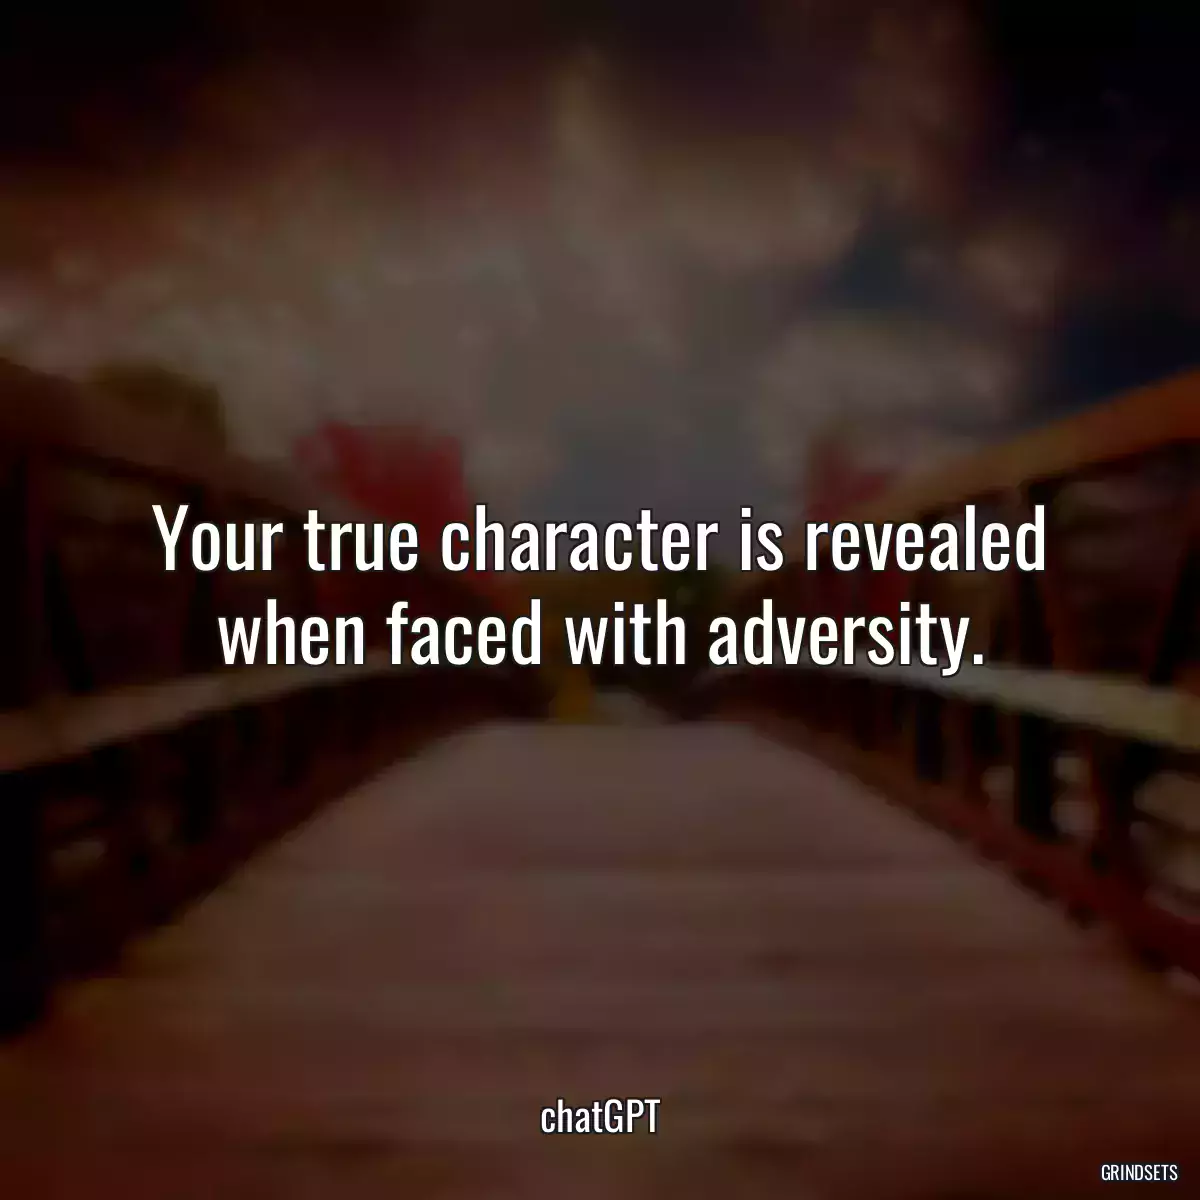 Your true character is revealed when faced with adversity.